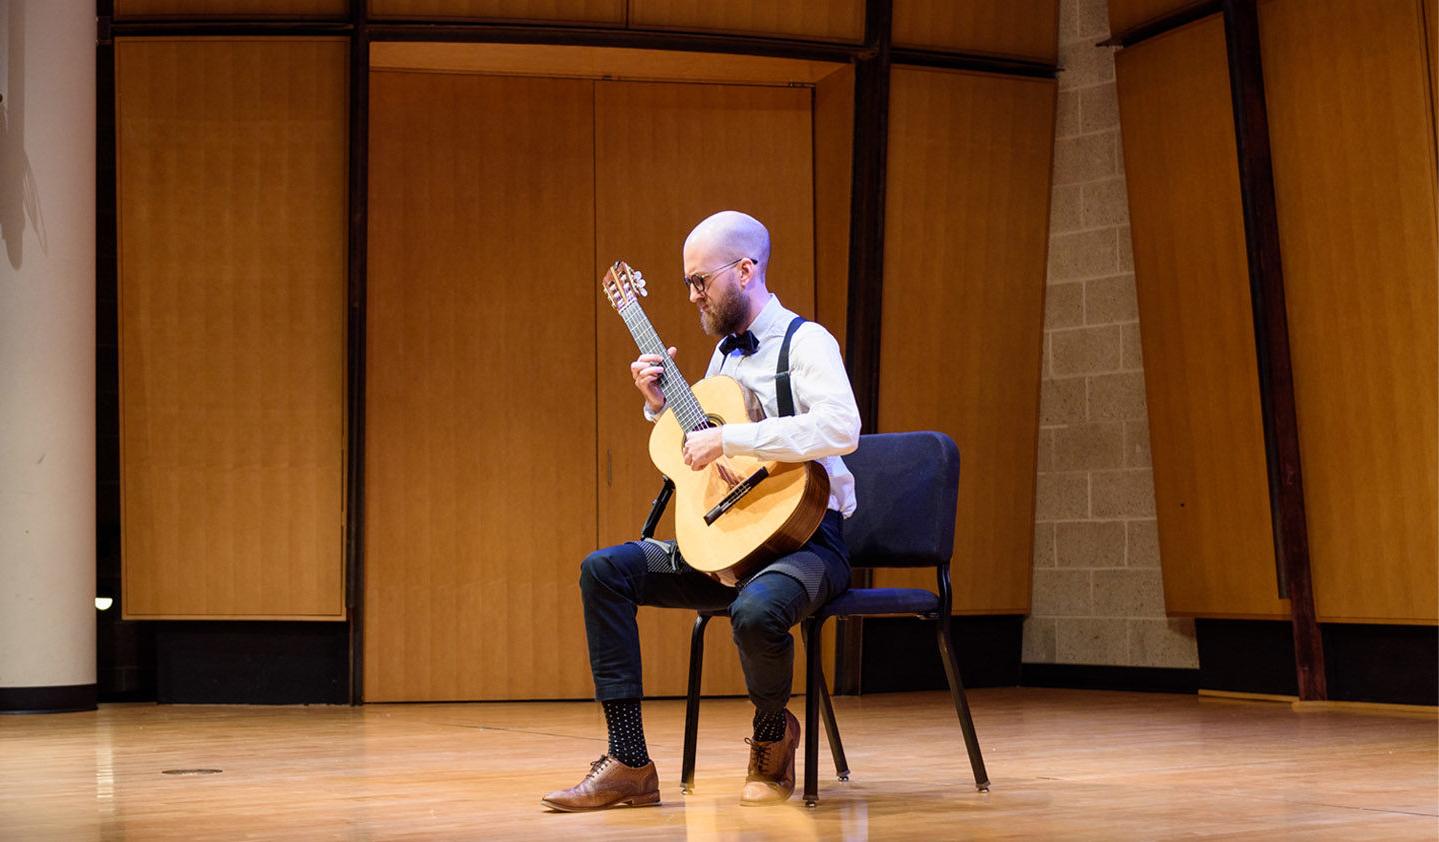 Classical guitarist performing solo in the King Center Recital Hall